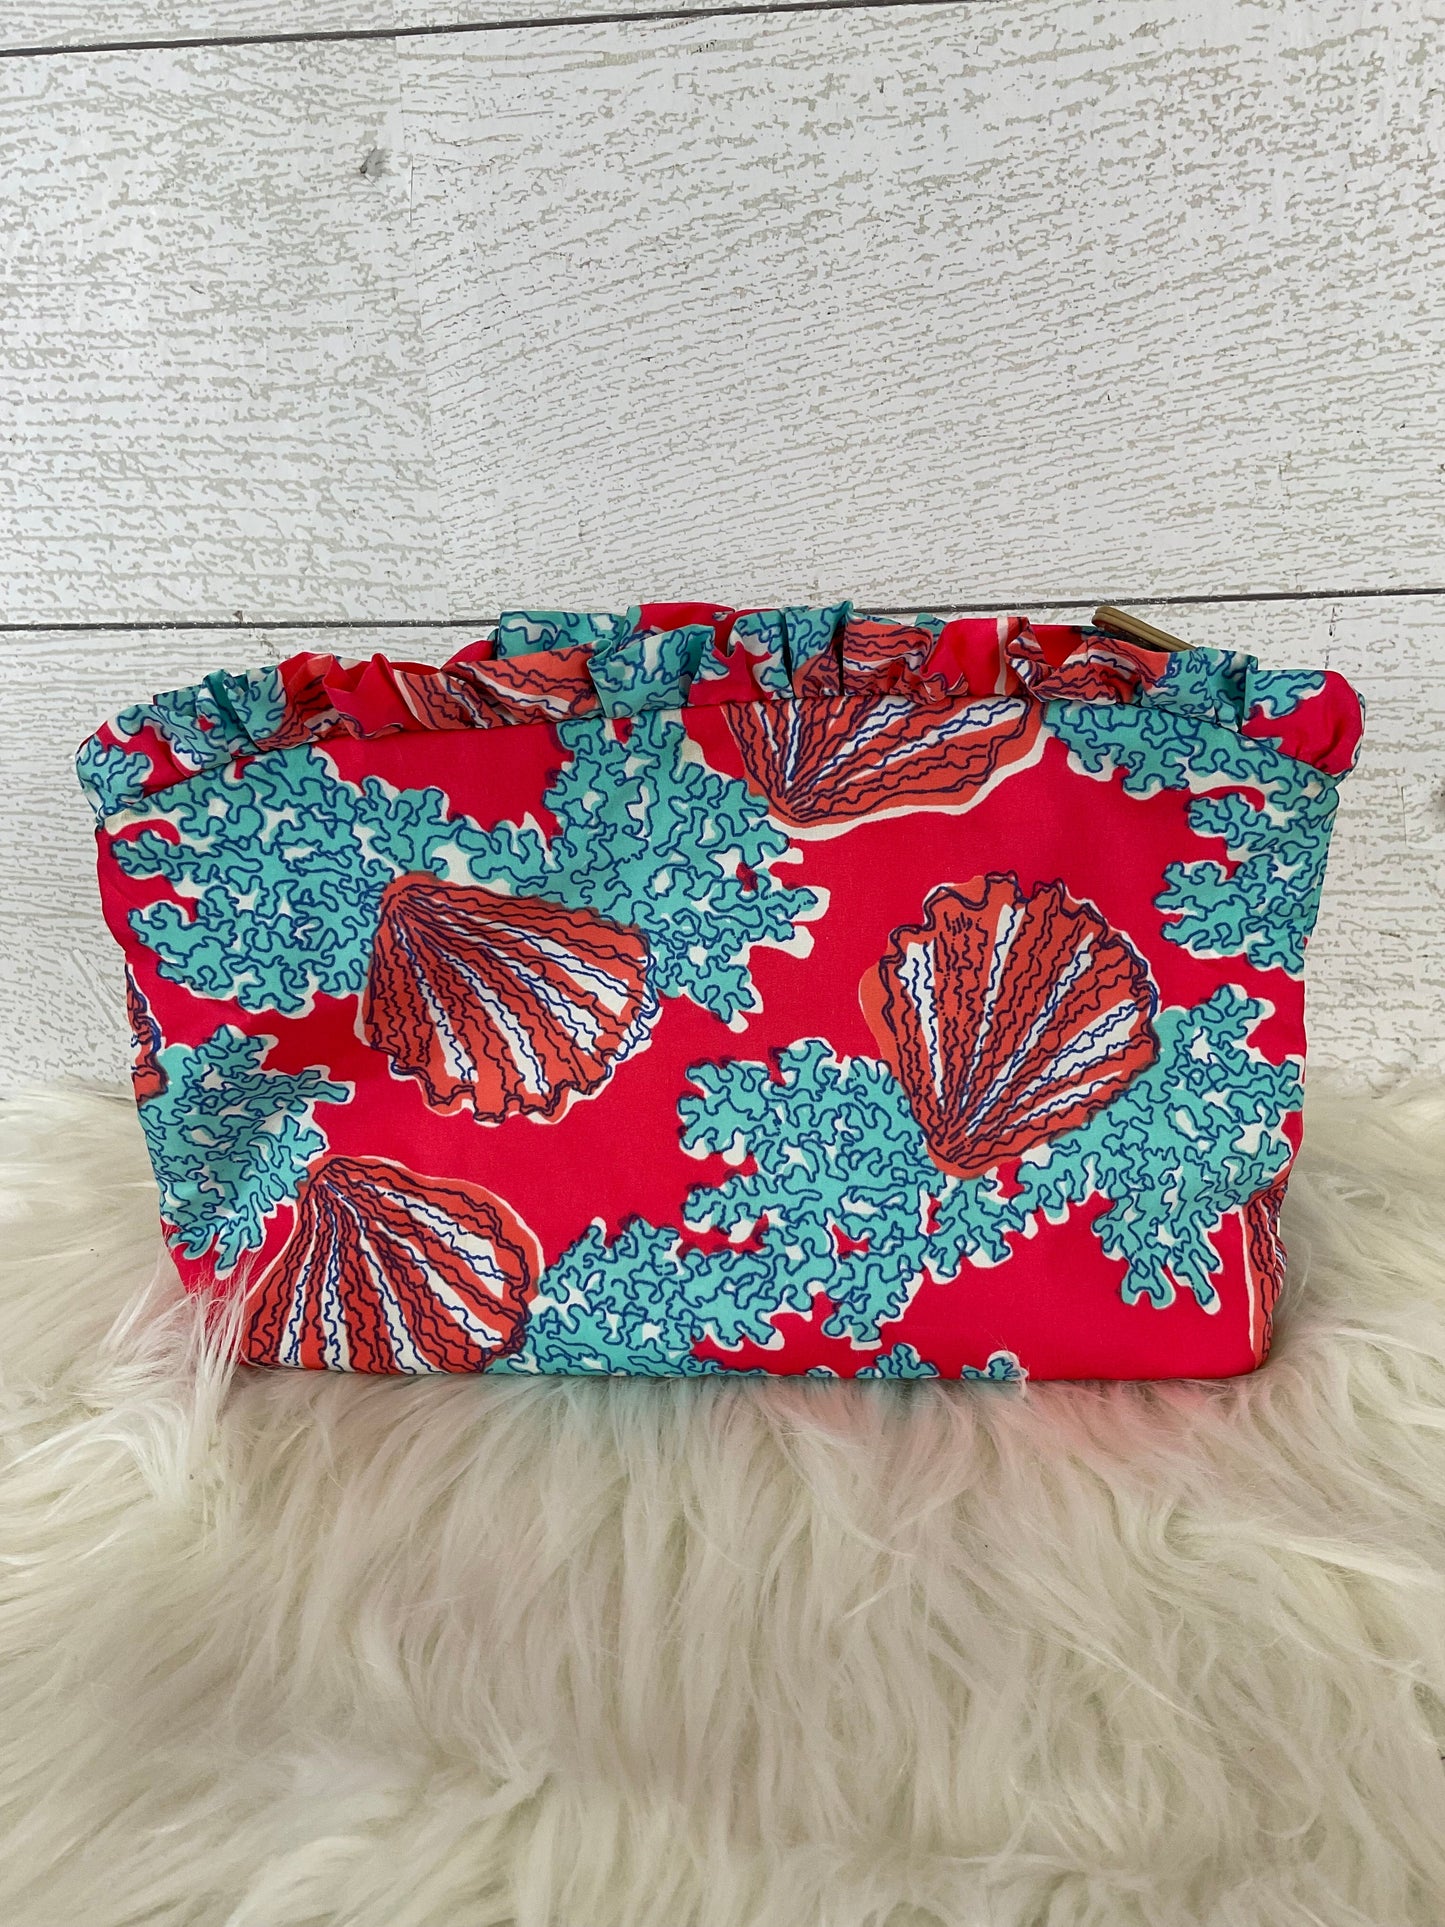 Clutch Designer Lilly Pulitzer, Size Small